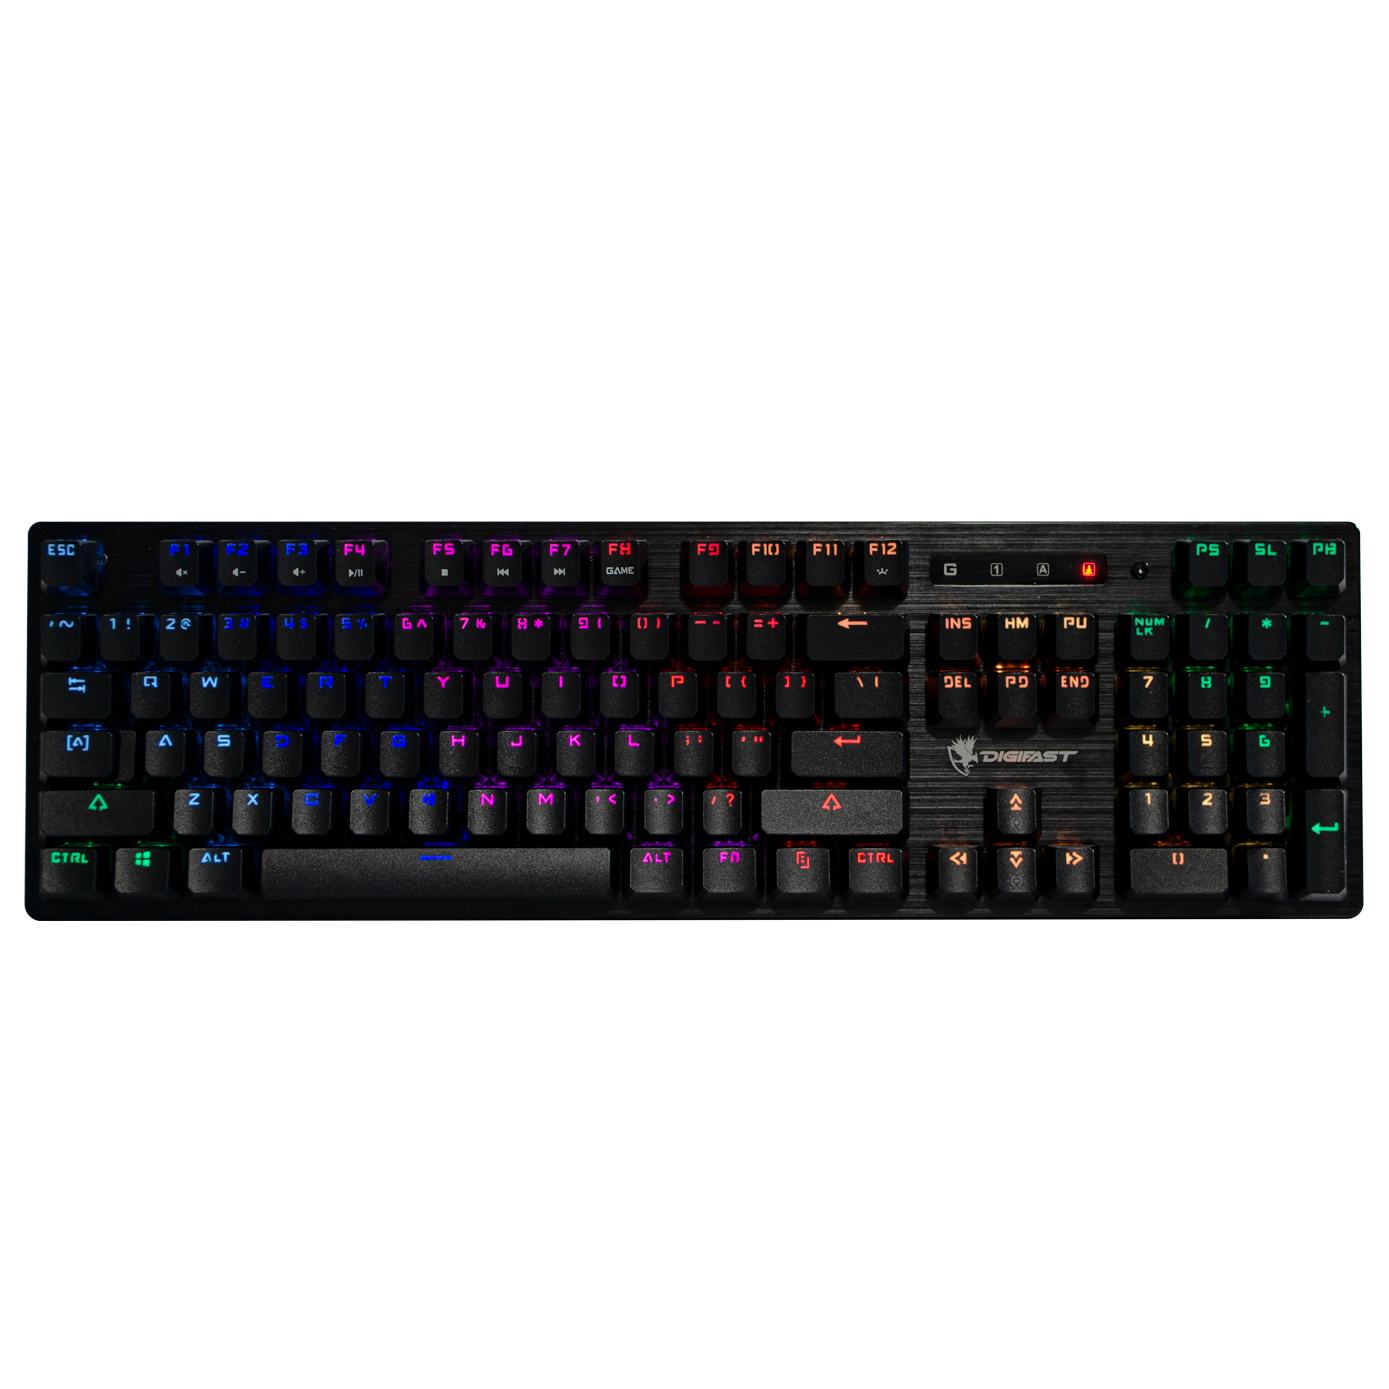 Digifast LK32 Mechanical RGB Gaming Keyboard, Optical Linear Switches 100 million durability, Customizable Color, Textured Surface, Water-Resistant